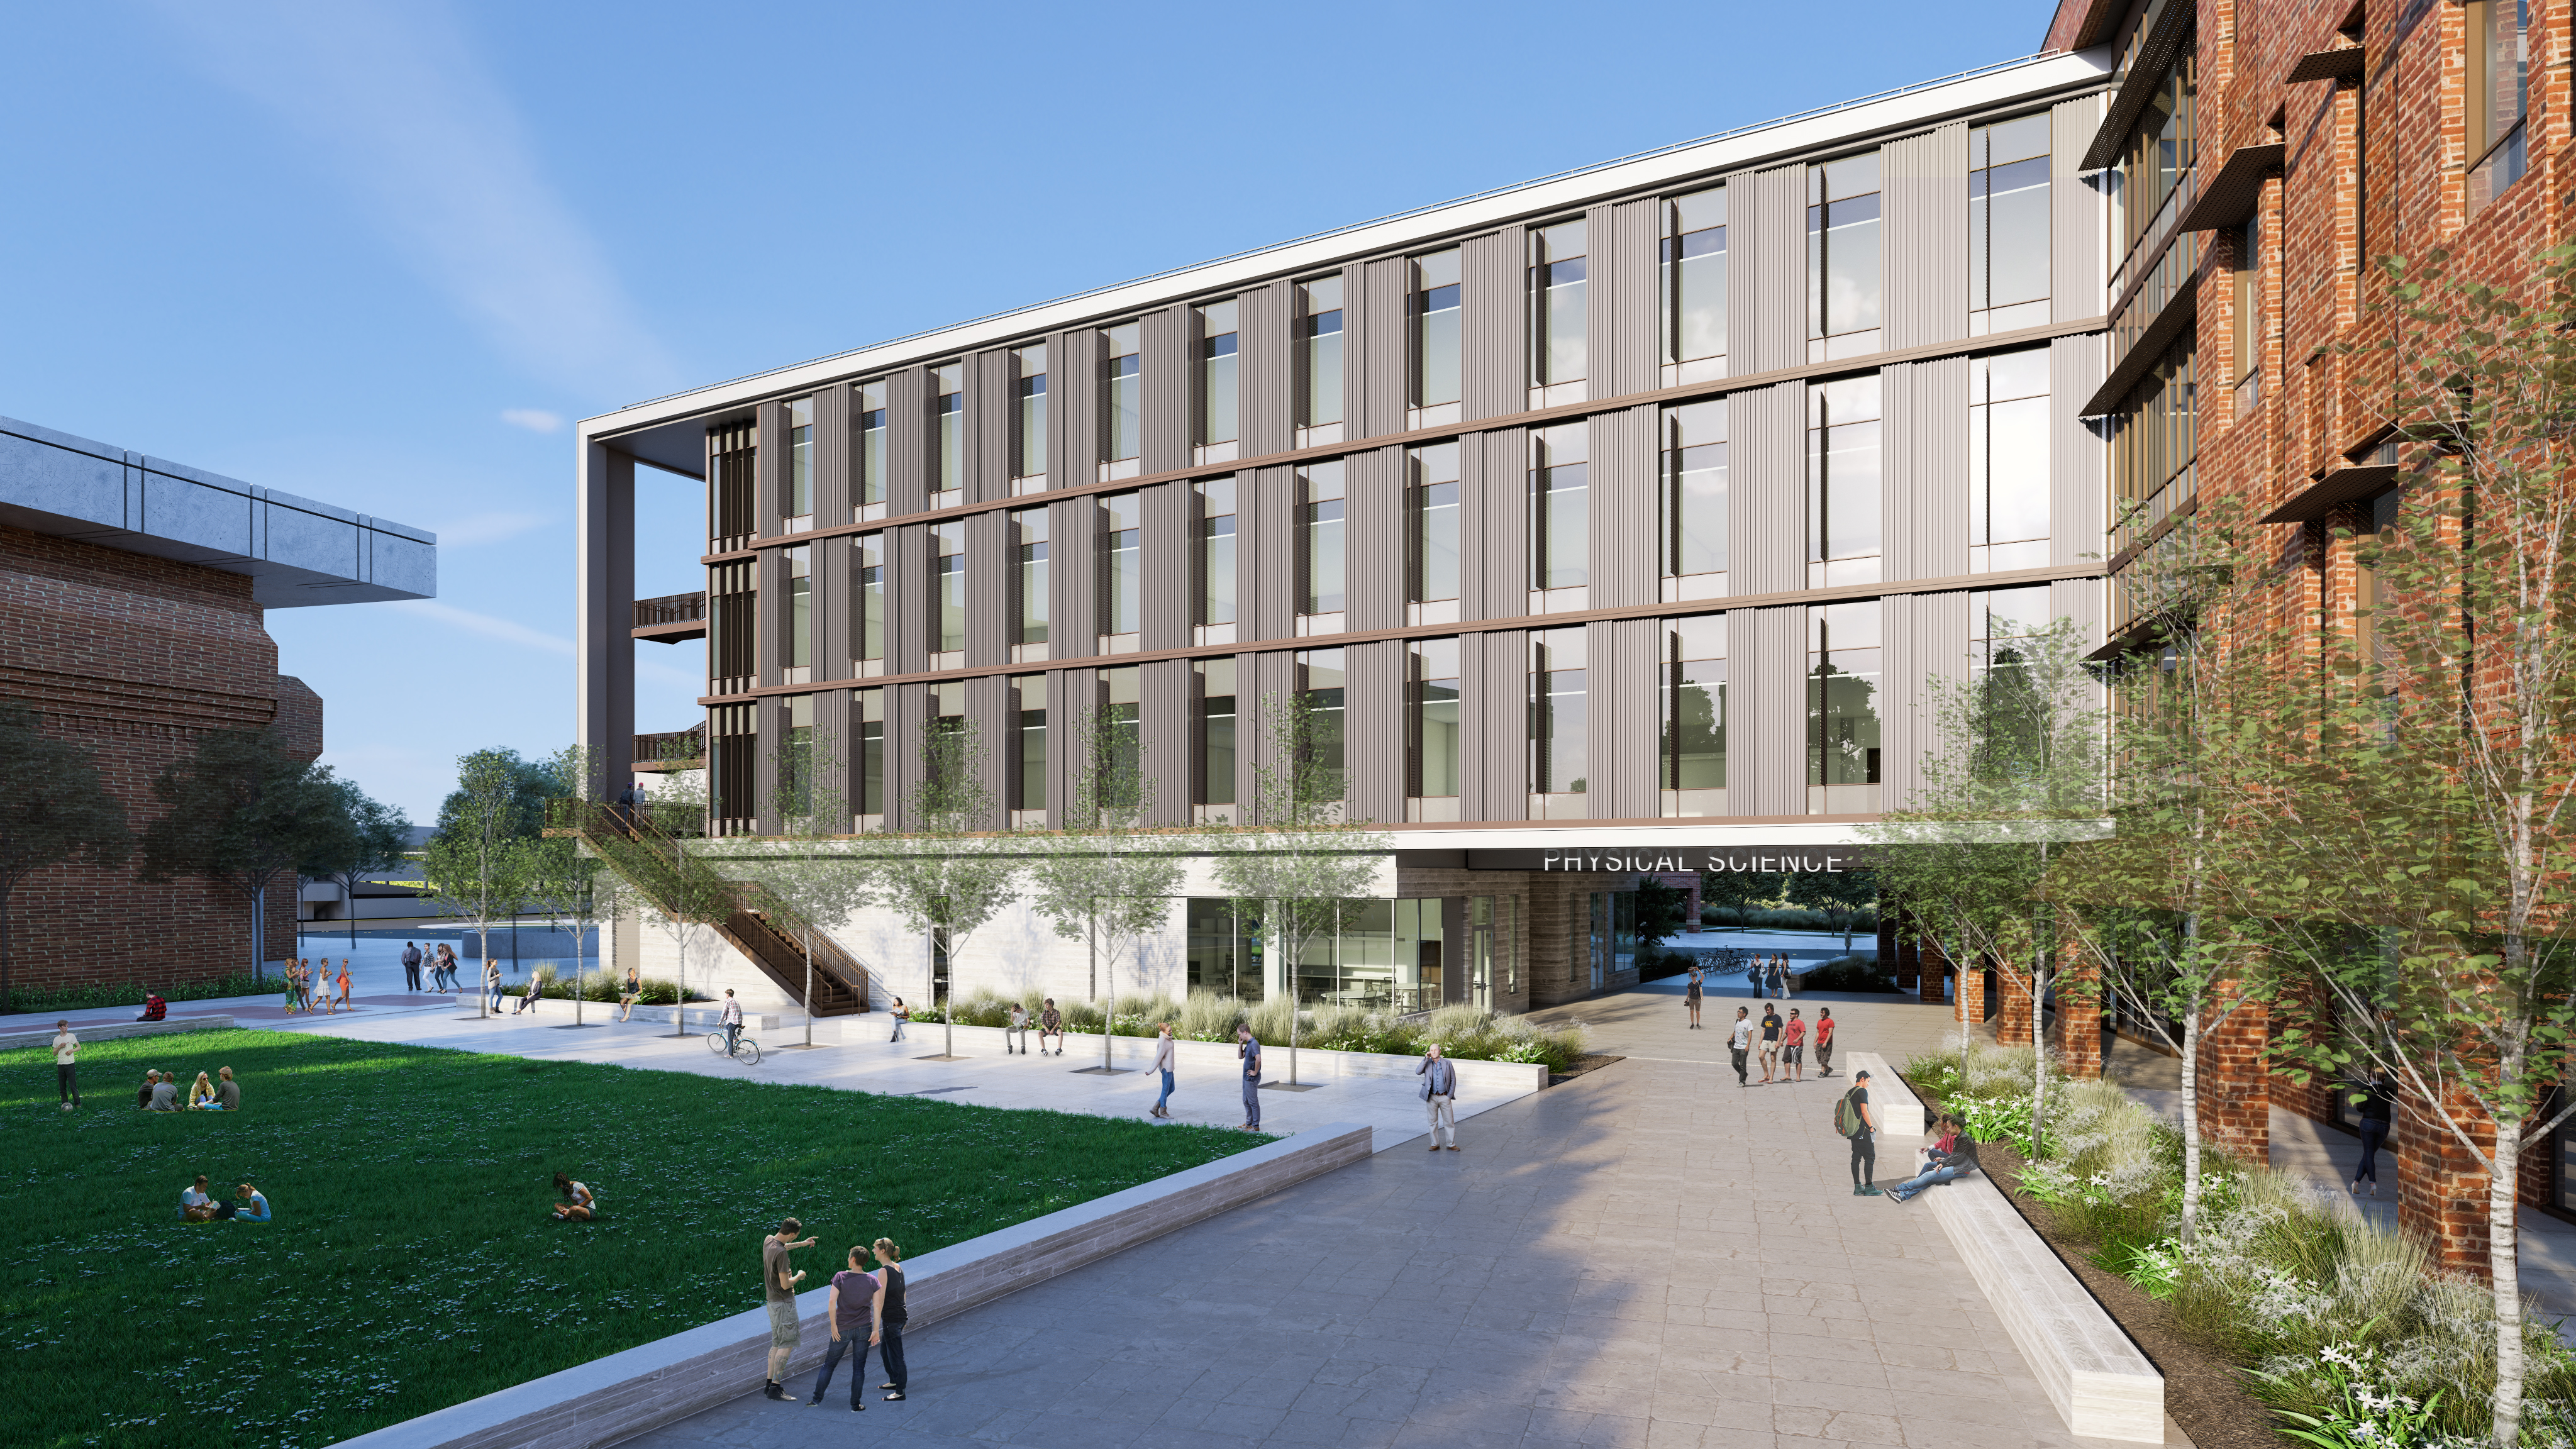 The new physical science building will be a state-of-the-art $101 million facility to help advance CSU, Chico’s role as a leader within the North State and across the 23-campus CSU system. Slated to open in fall 2020, the 110,200-square-foot building will include space for chemistry, physics, geological science, and science education labs, as well as active-learning classrooms, synergy between interior learning spaces and outdoor classrooms, graduate research studios, a dean’s suite, dozens of faculty offices, and administrative and support areas.